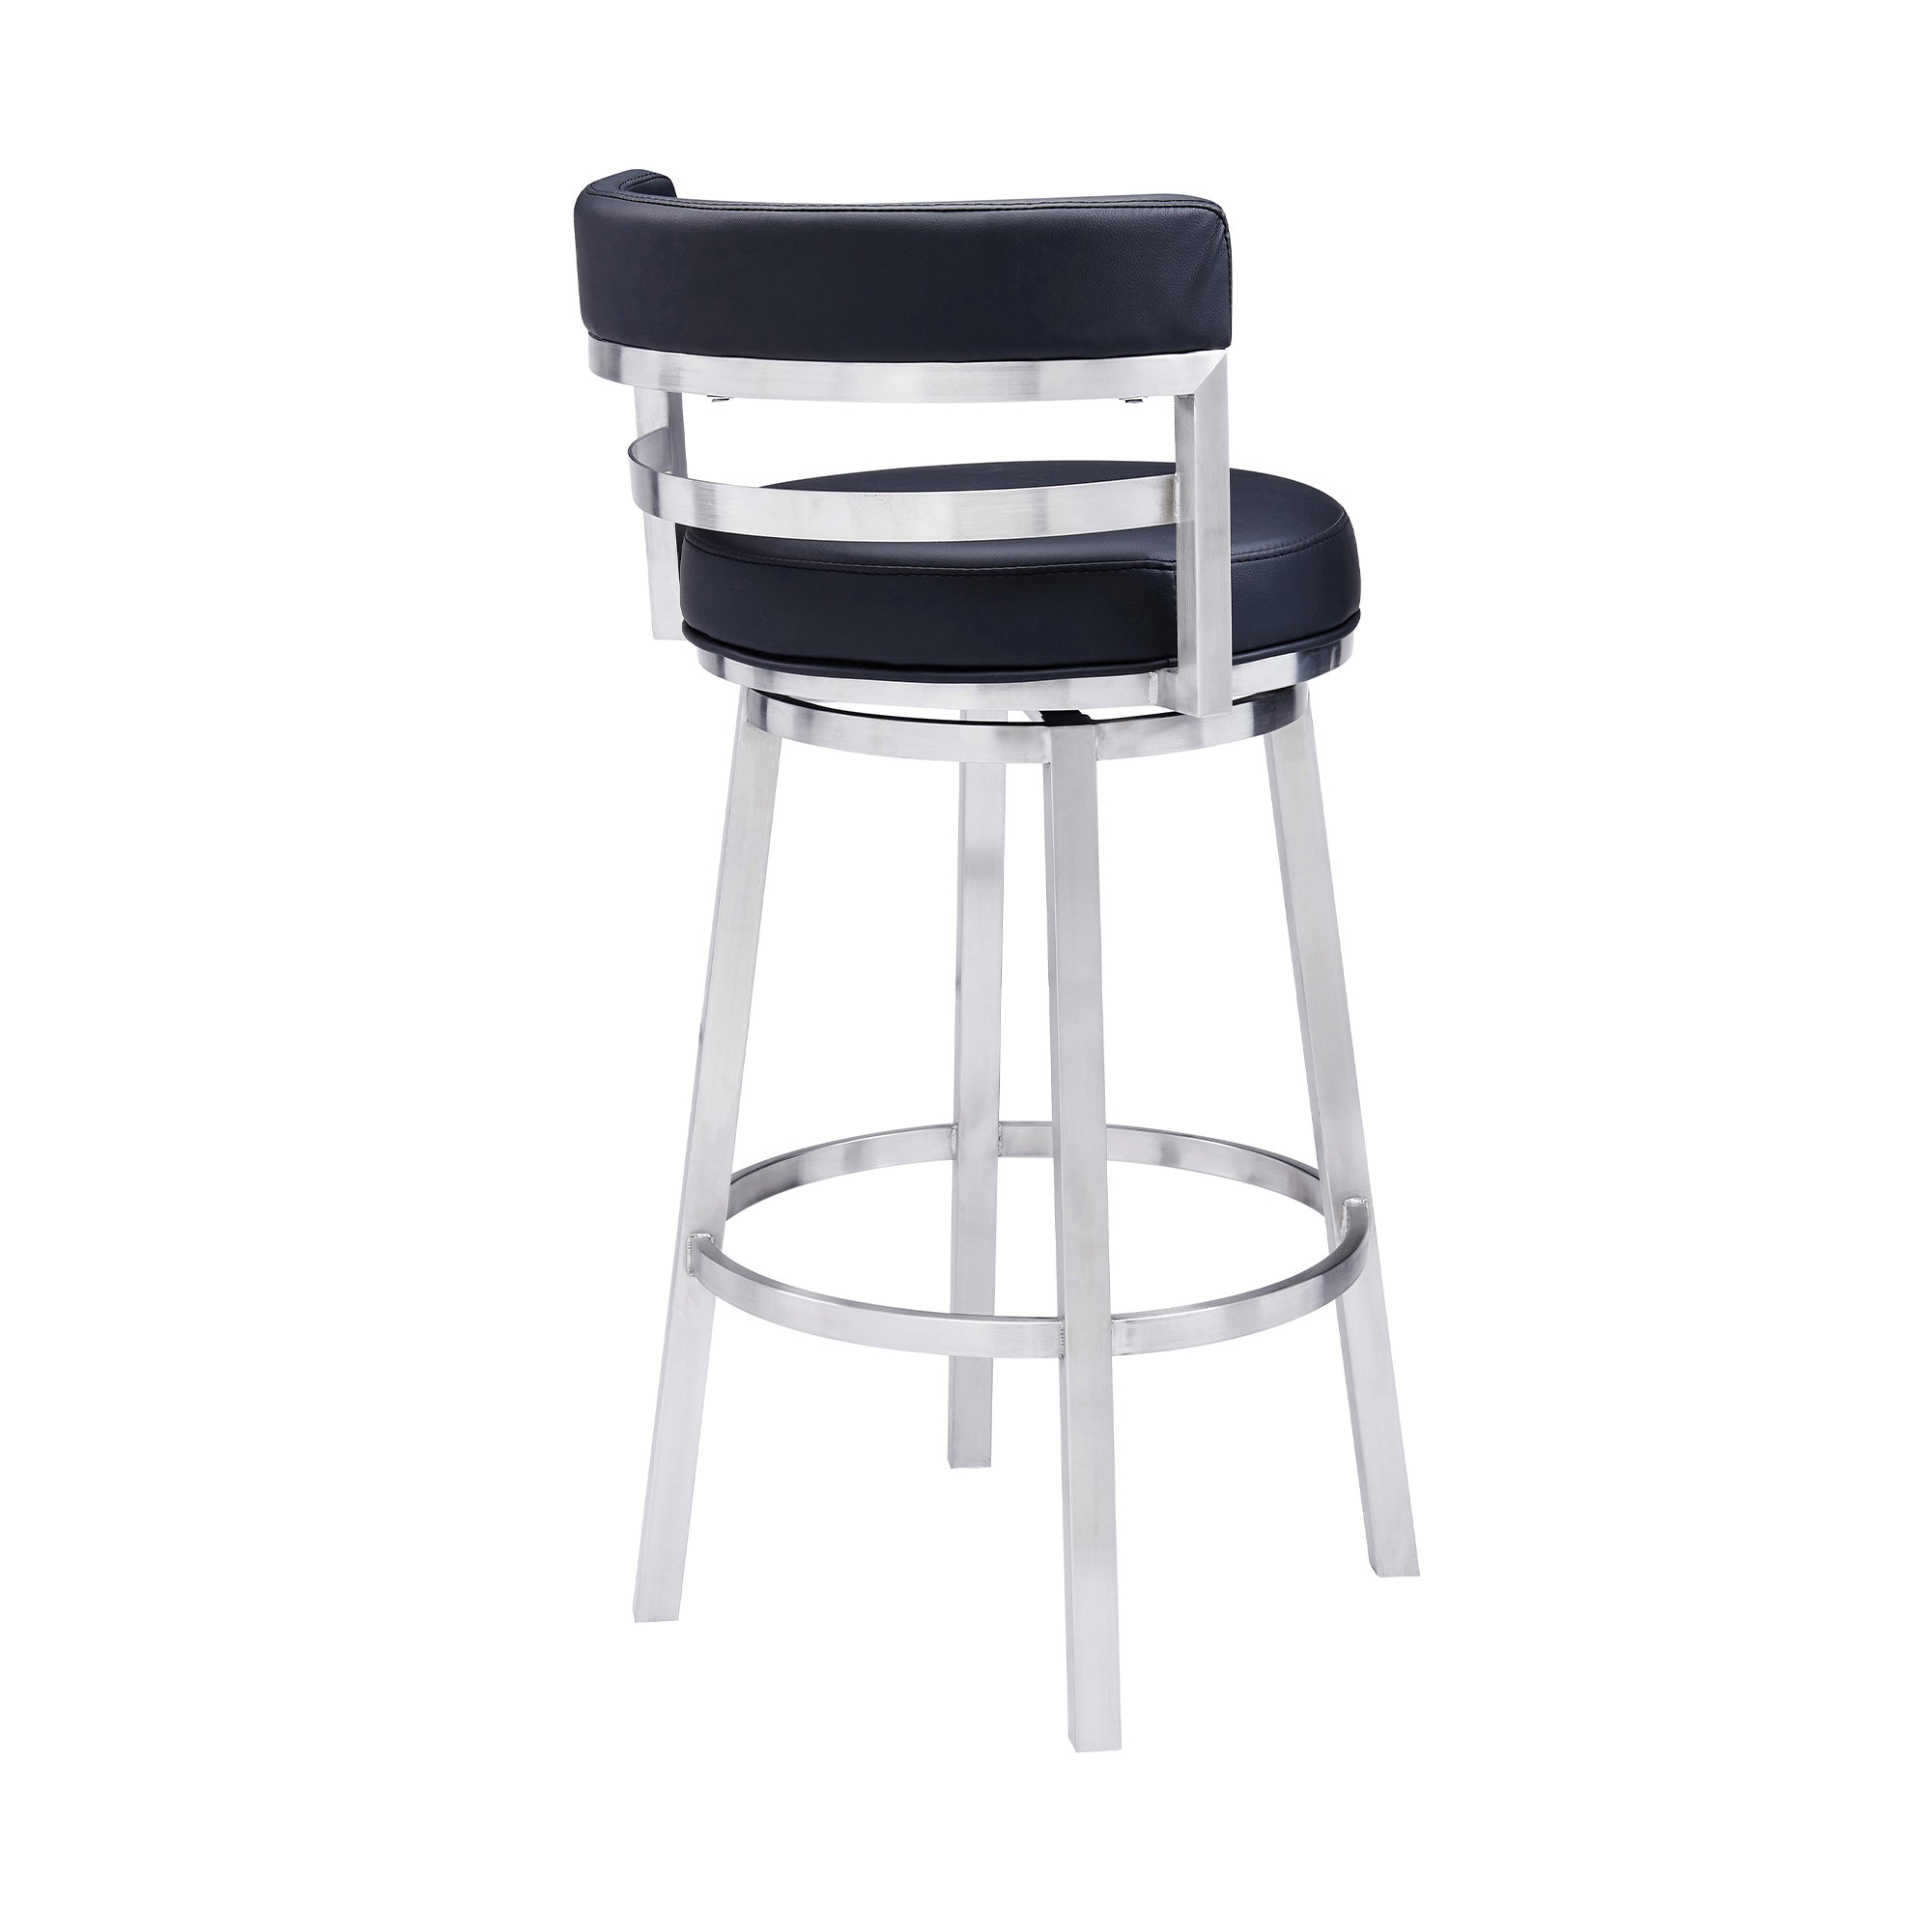 Armen Living - Titana Bar or Counter Stool in Black Faux Leather and Metal - 840254335110